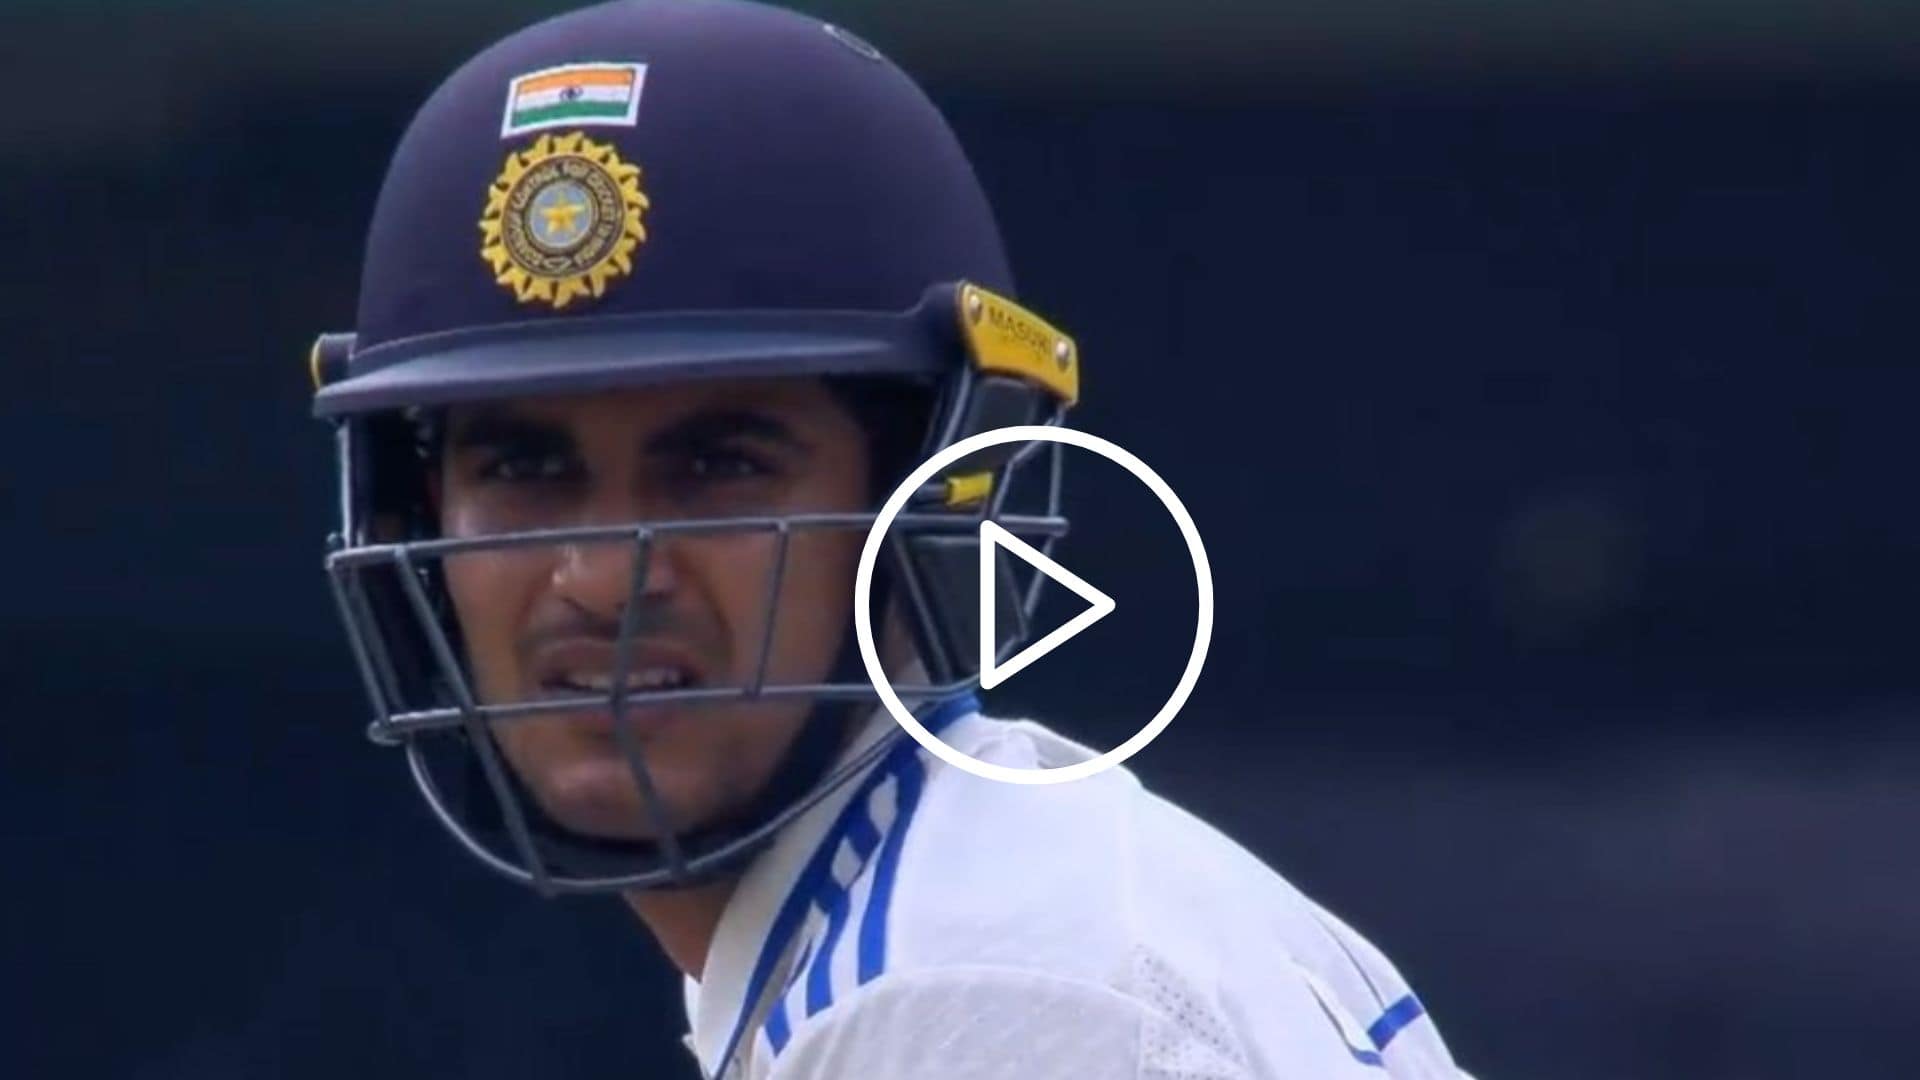 [Watch] Shubman Gill Breaks His Shackles As He Smashes His 5th Test Fifty at Vizag vs ENG